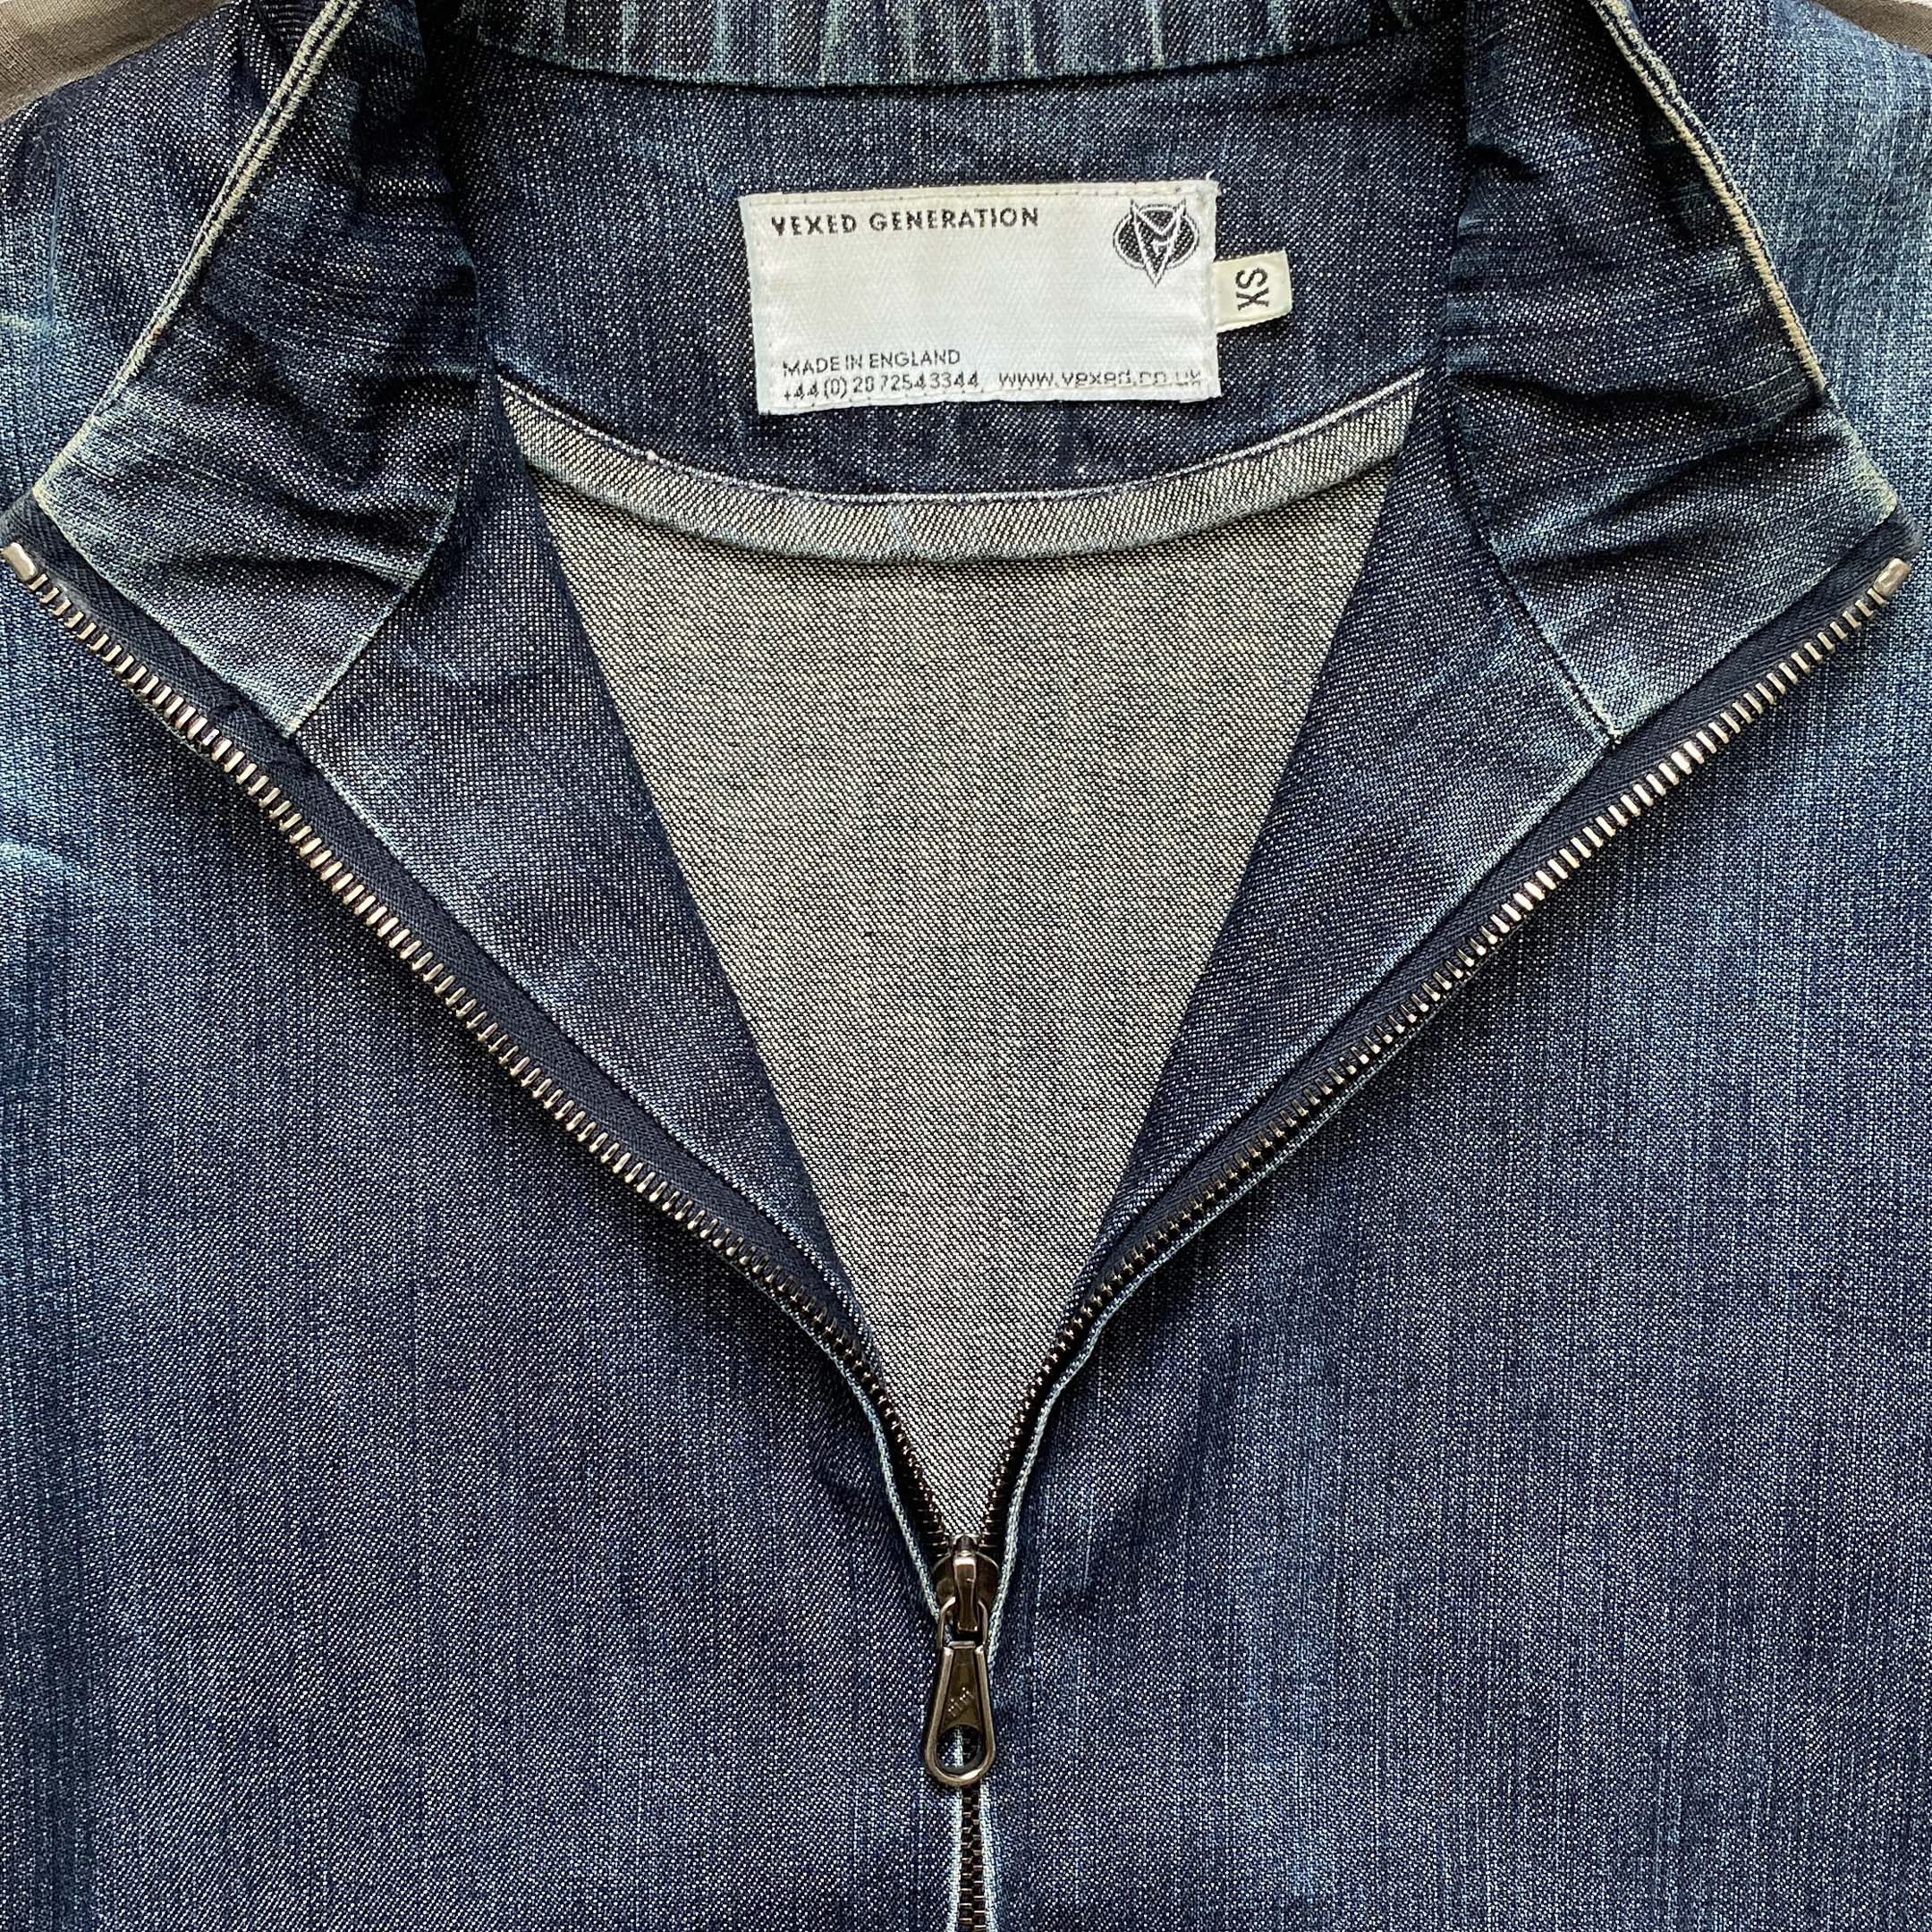 Vexed Generation, 1990s 'Recovery Position' Denim Zipped Jacket